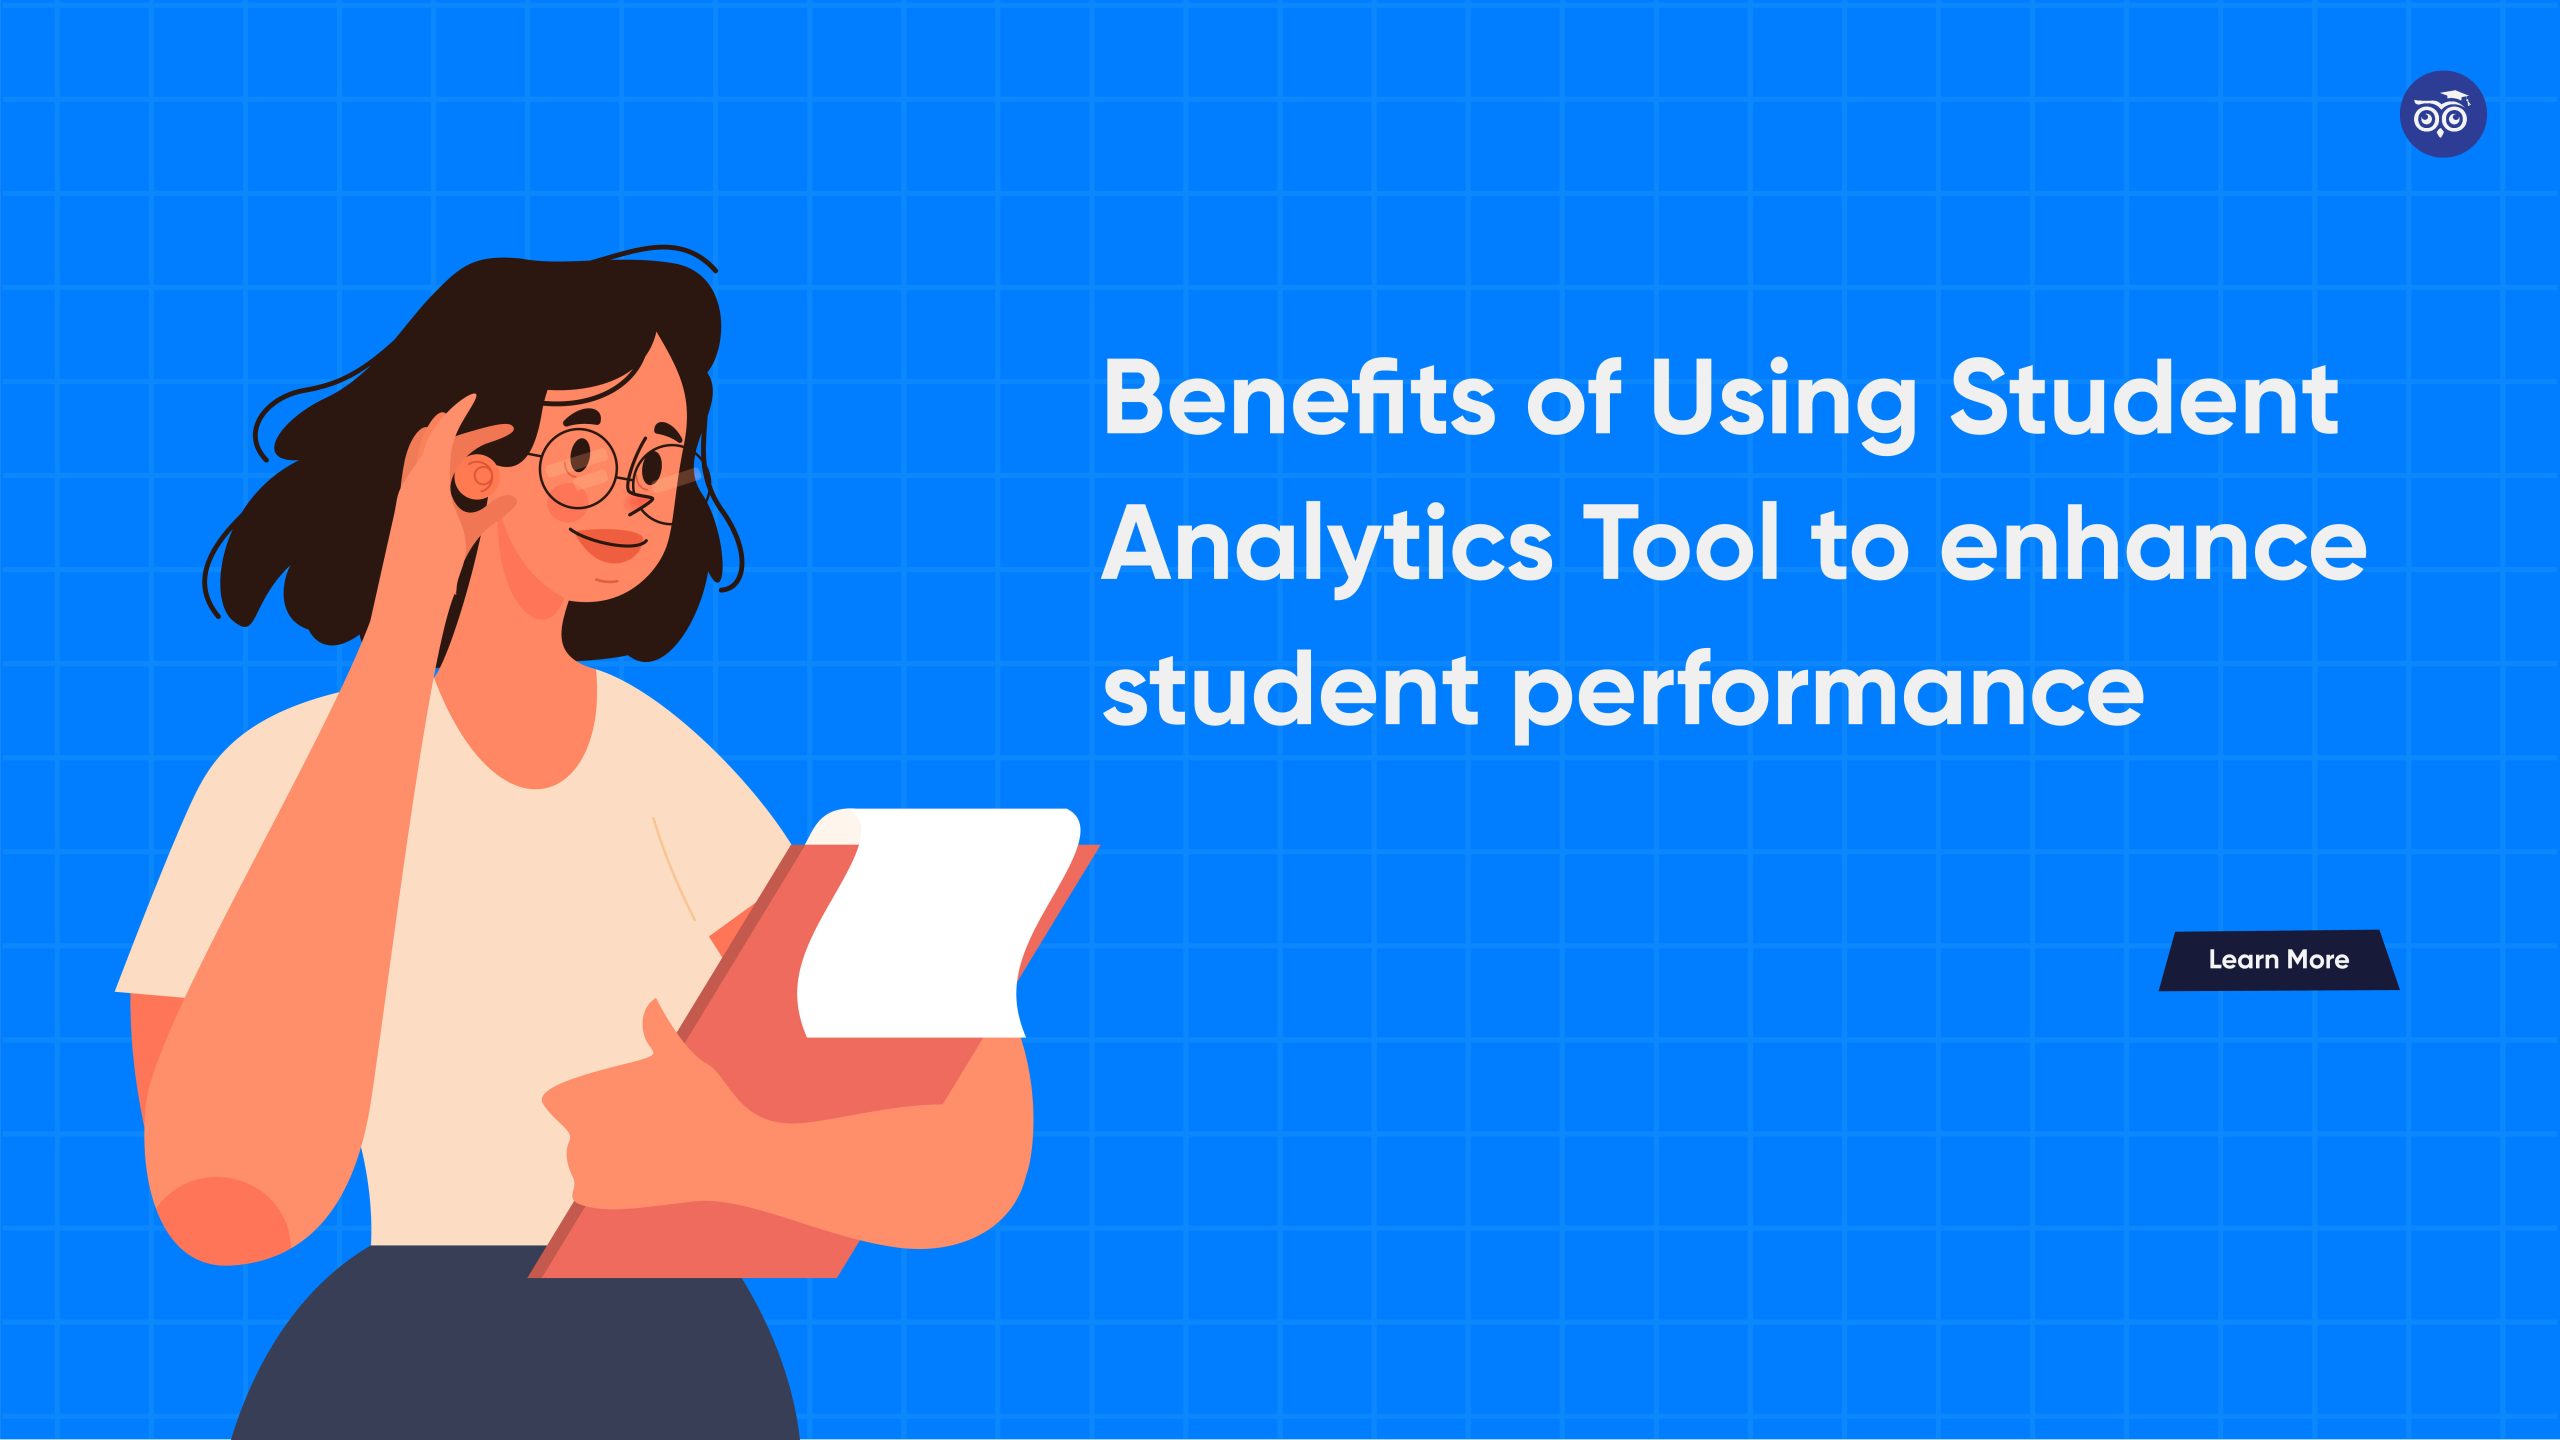 The benefits of using student analytics to track student performance and engagement